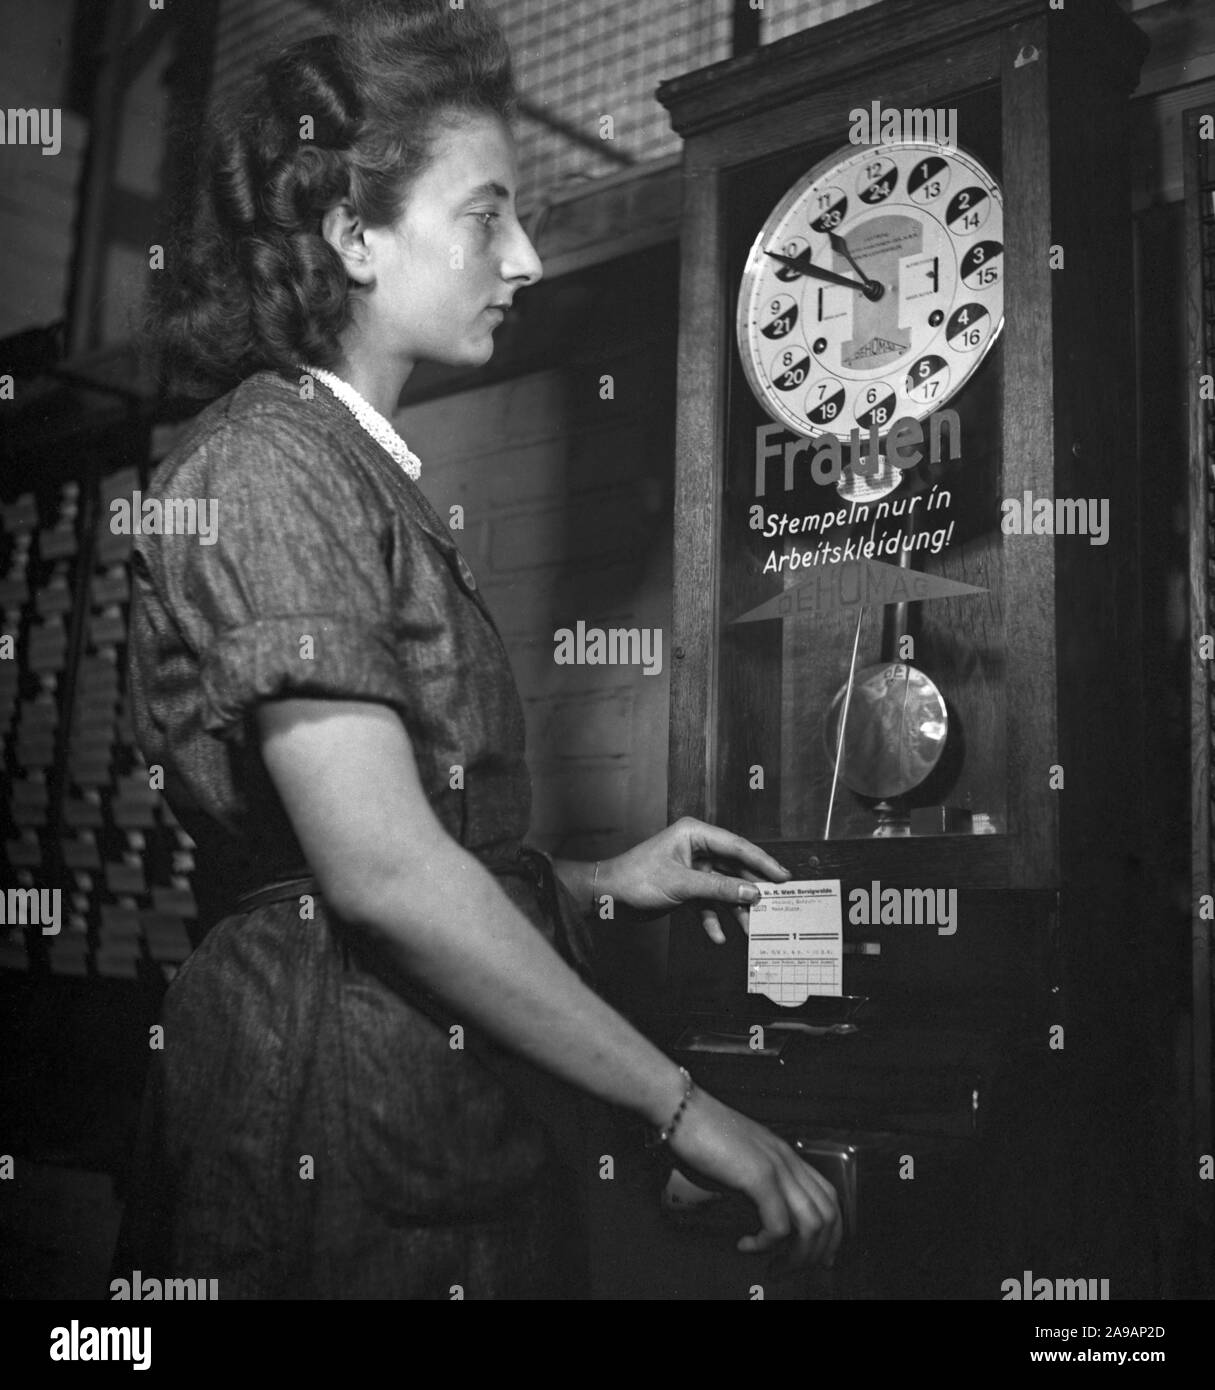 A woman at the attendance clock, Germany 1940s Stock Photo